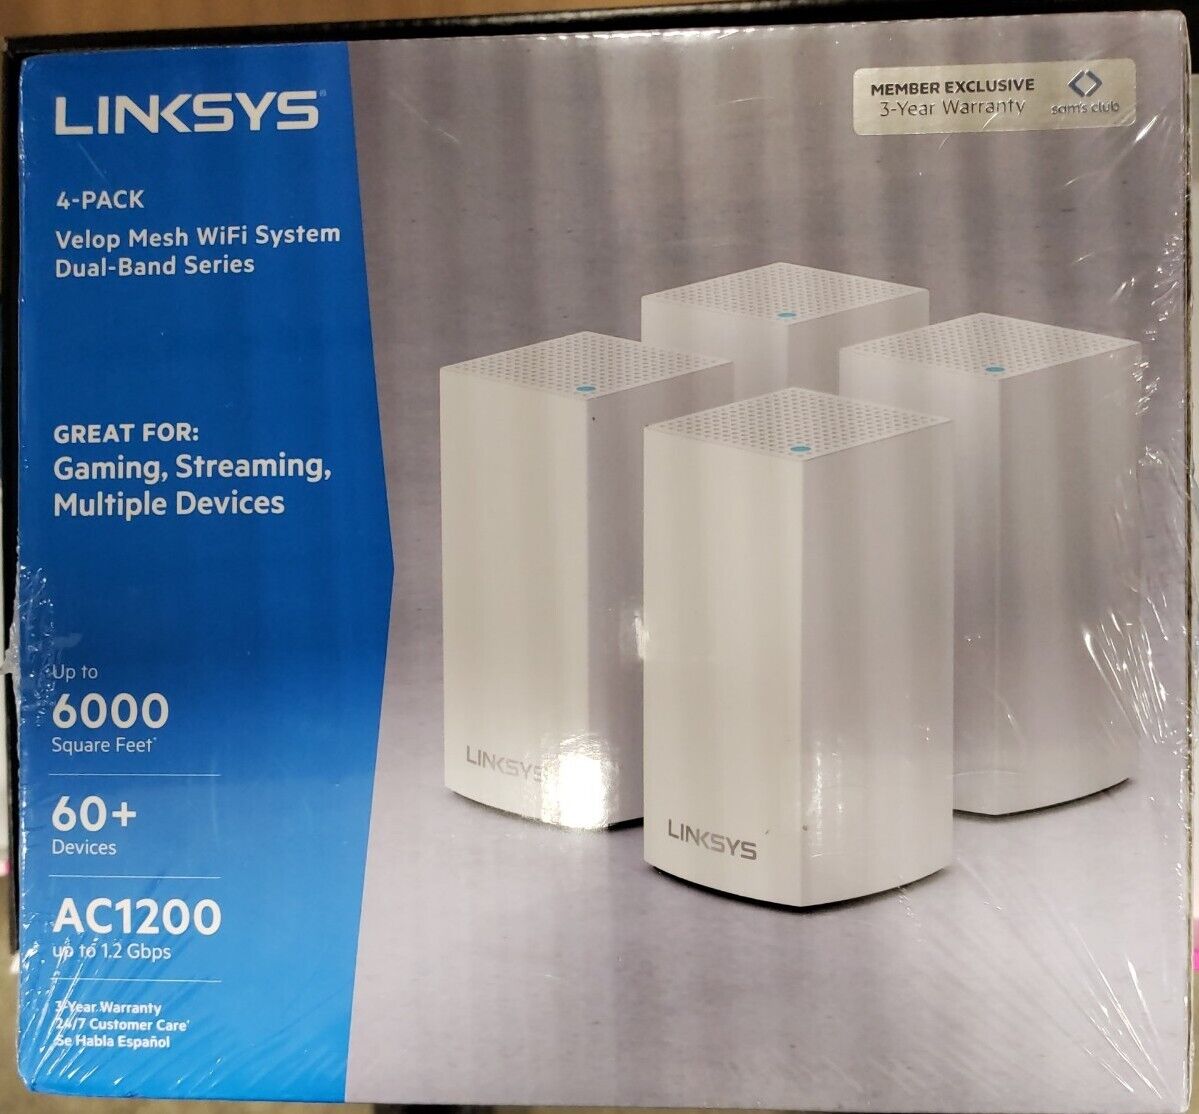 Linksys 4PK Velop Mesh WiFi System Dualband Series - F5Z929-4A - New Sealed